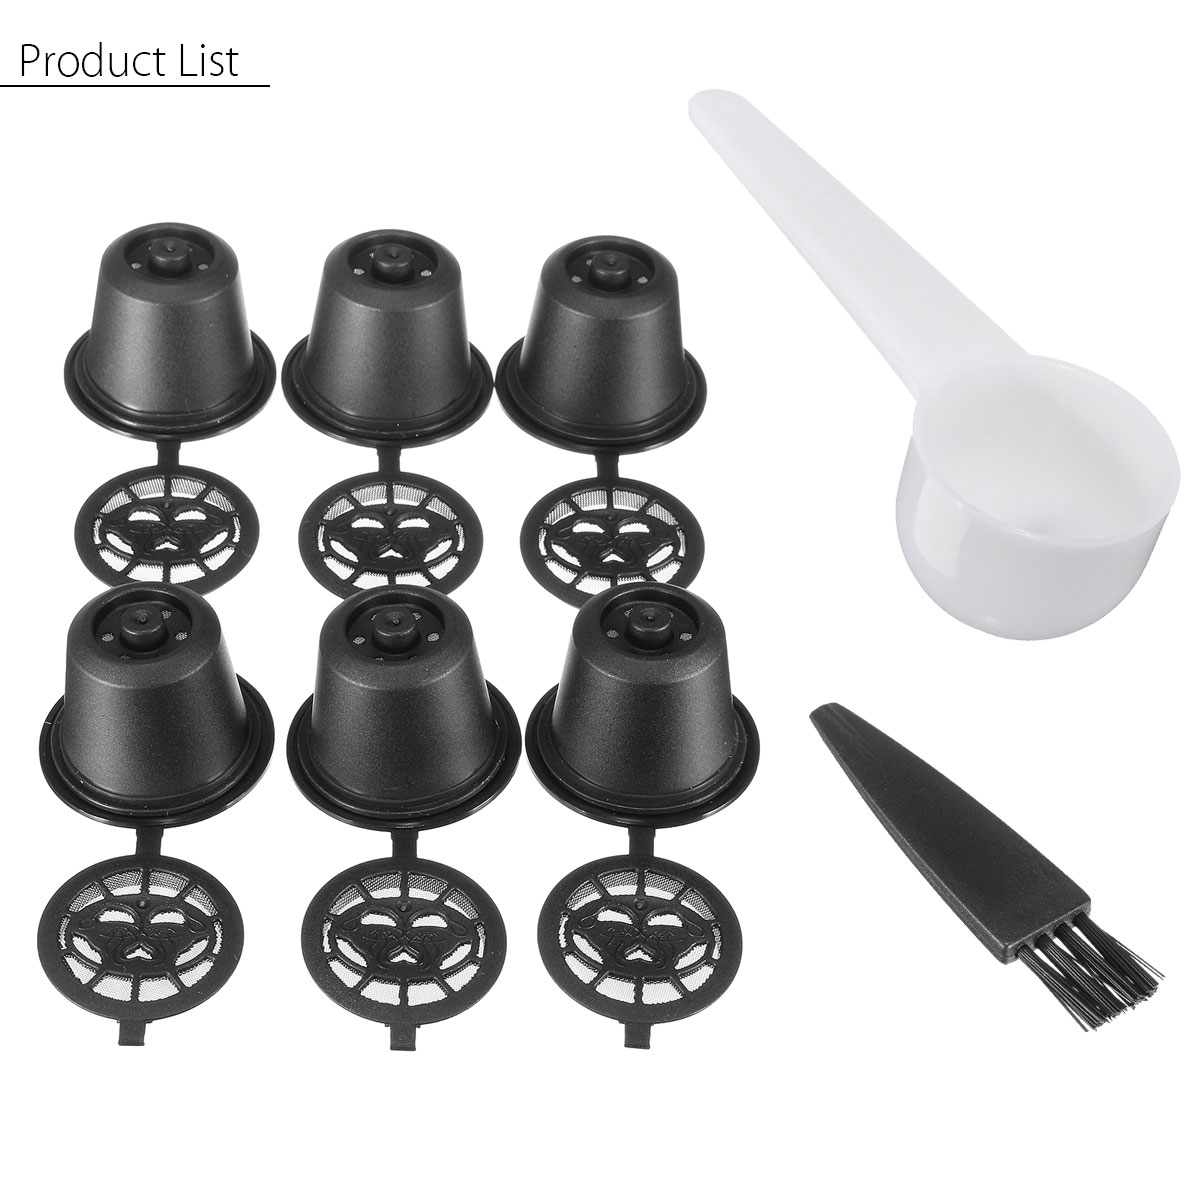 8 Pcs Sets Black Refillable Coffee Capsule Cup Reusable Refilling Filter For Nespresso Machine With Brush